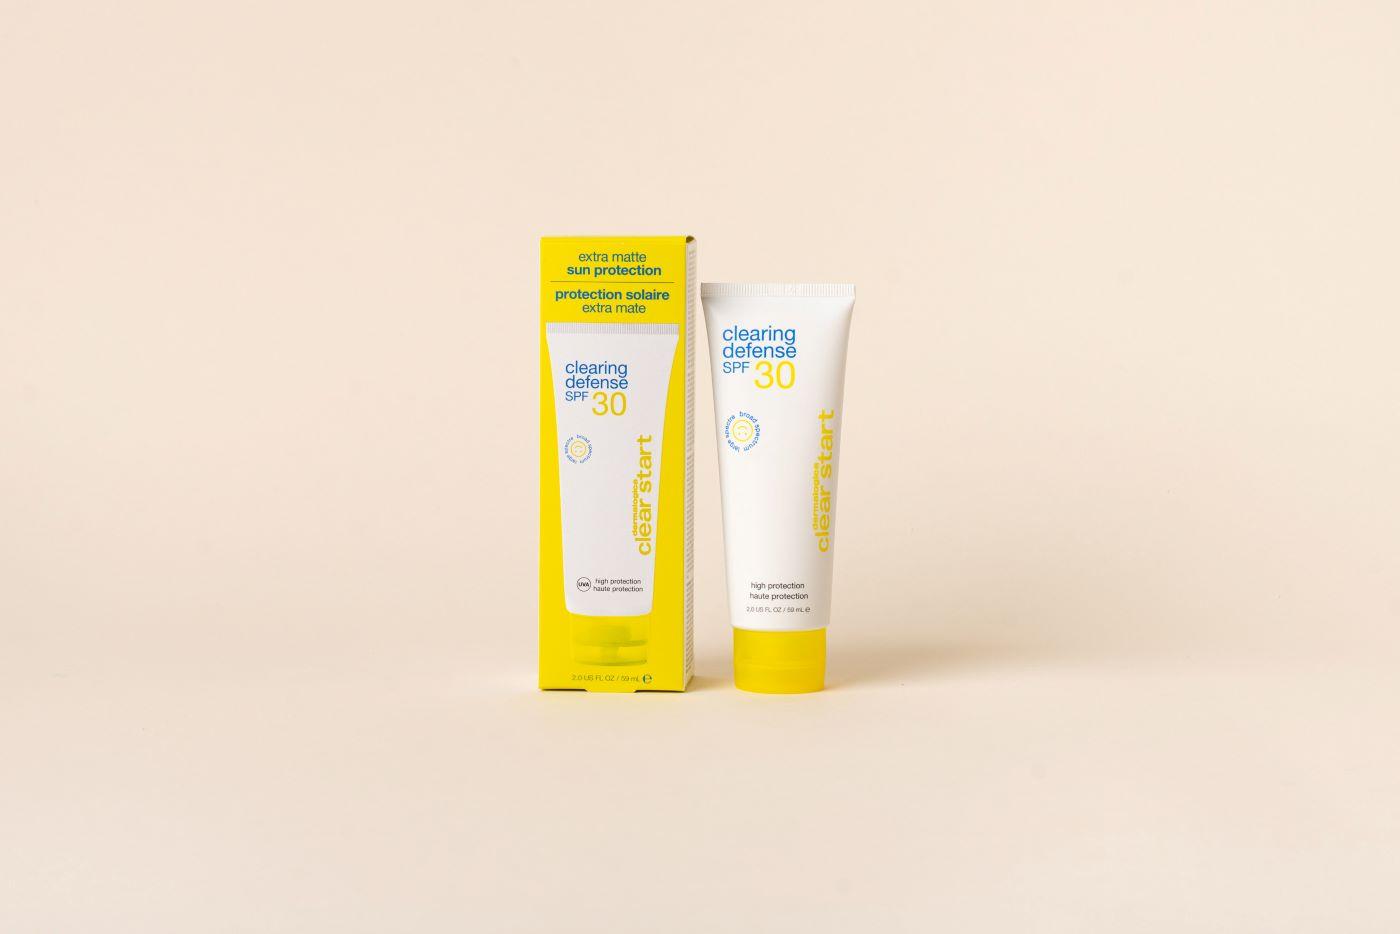 clearing defense spf30_primary secondary_front_cream copy.jpg